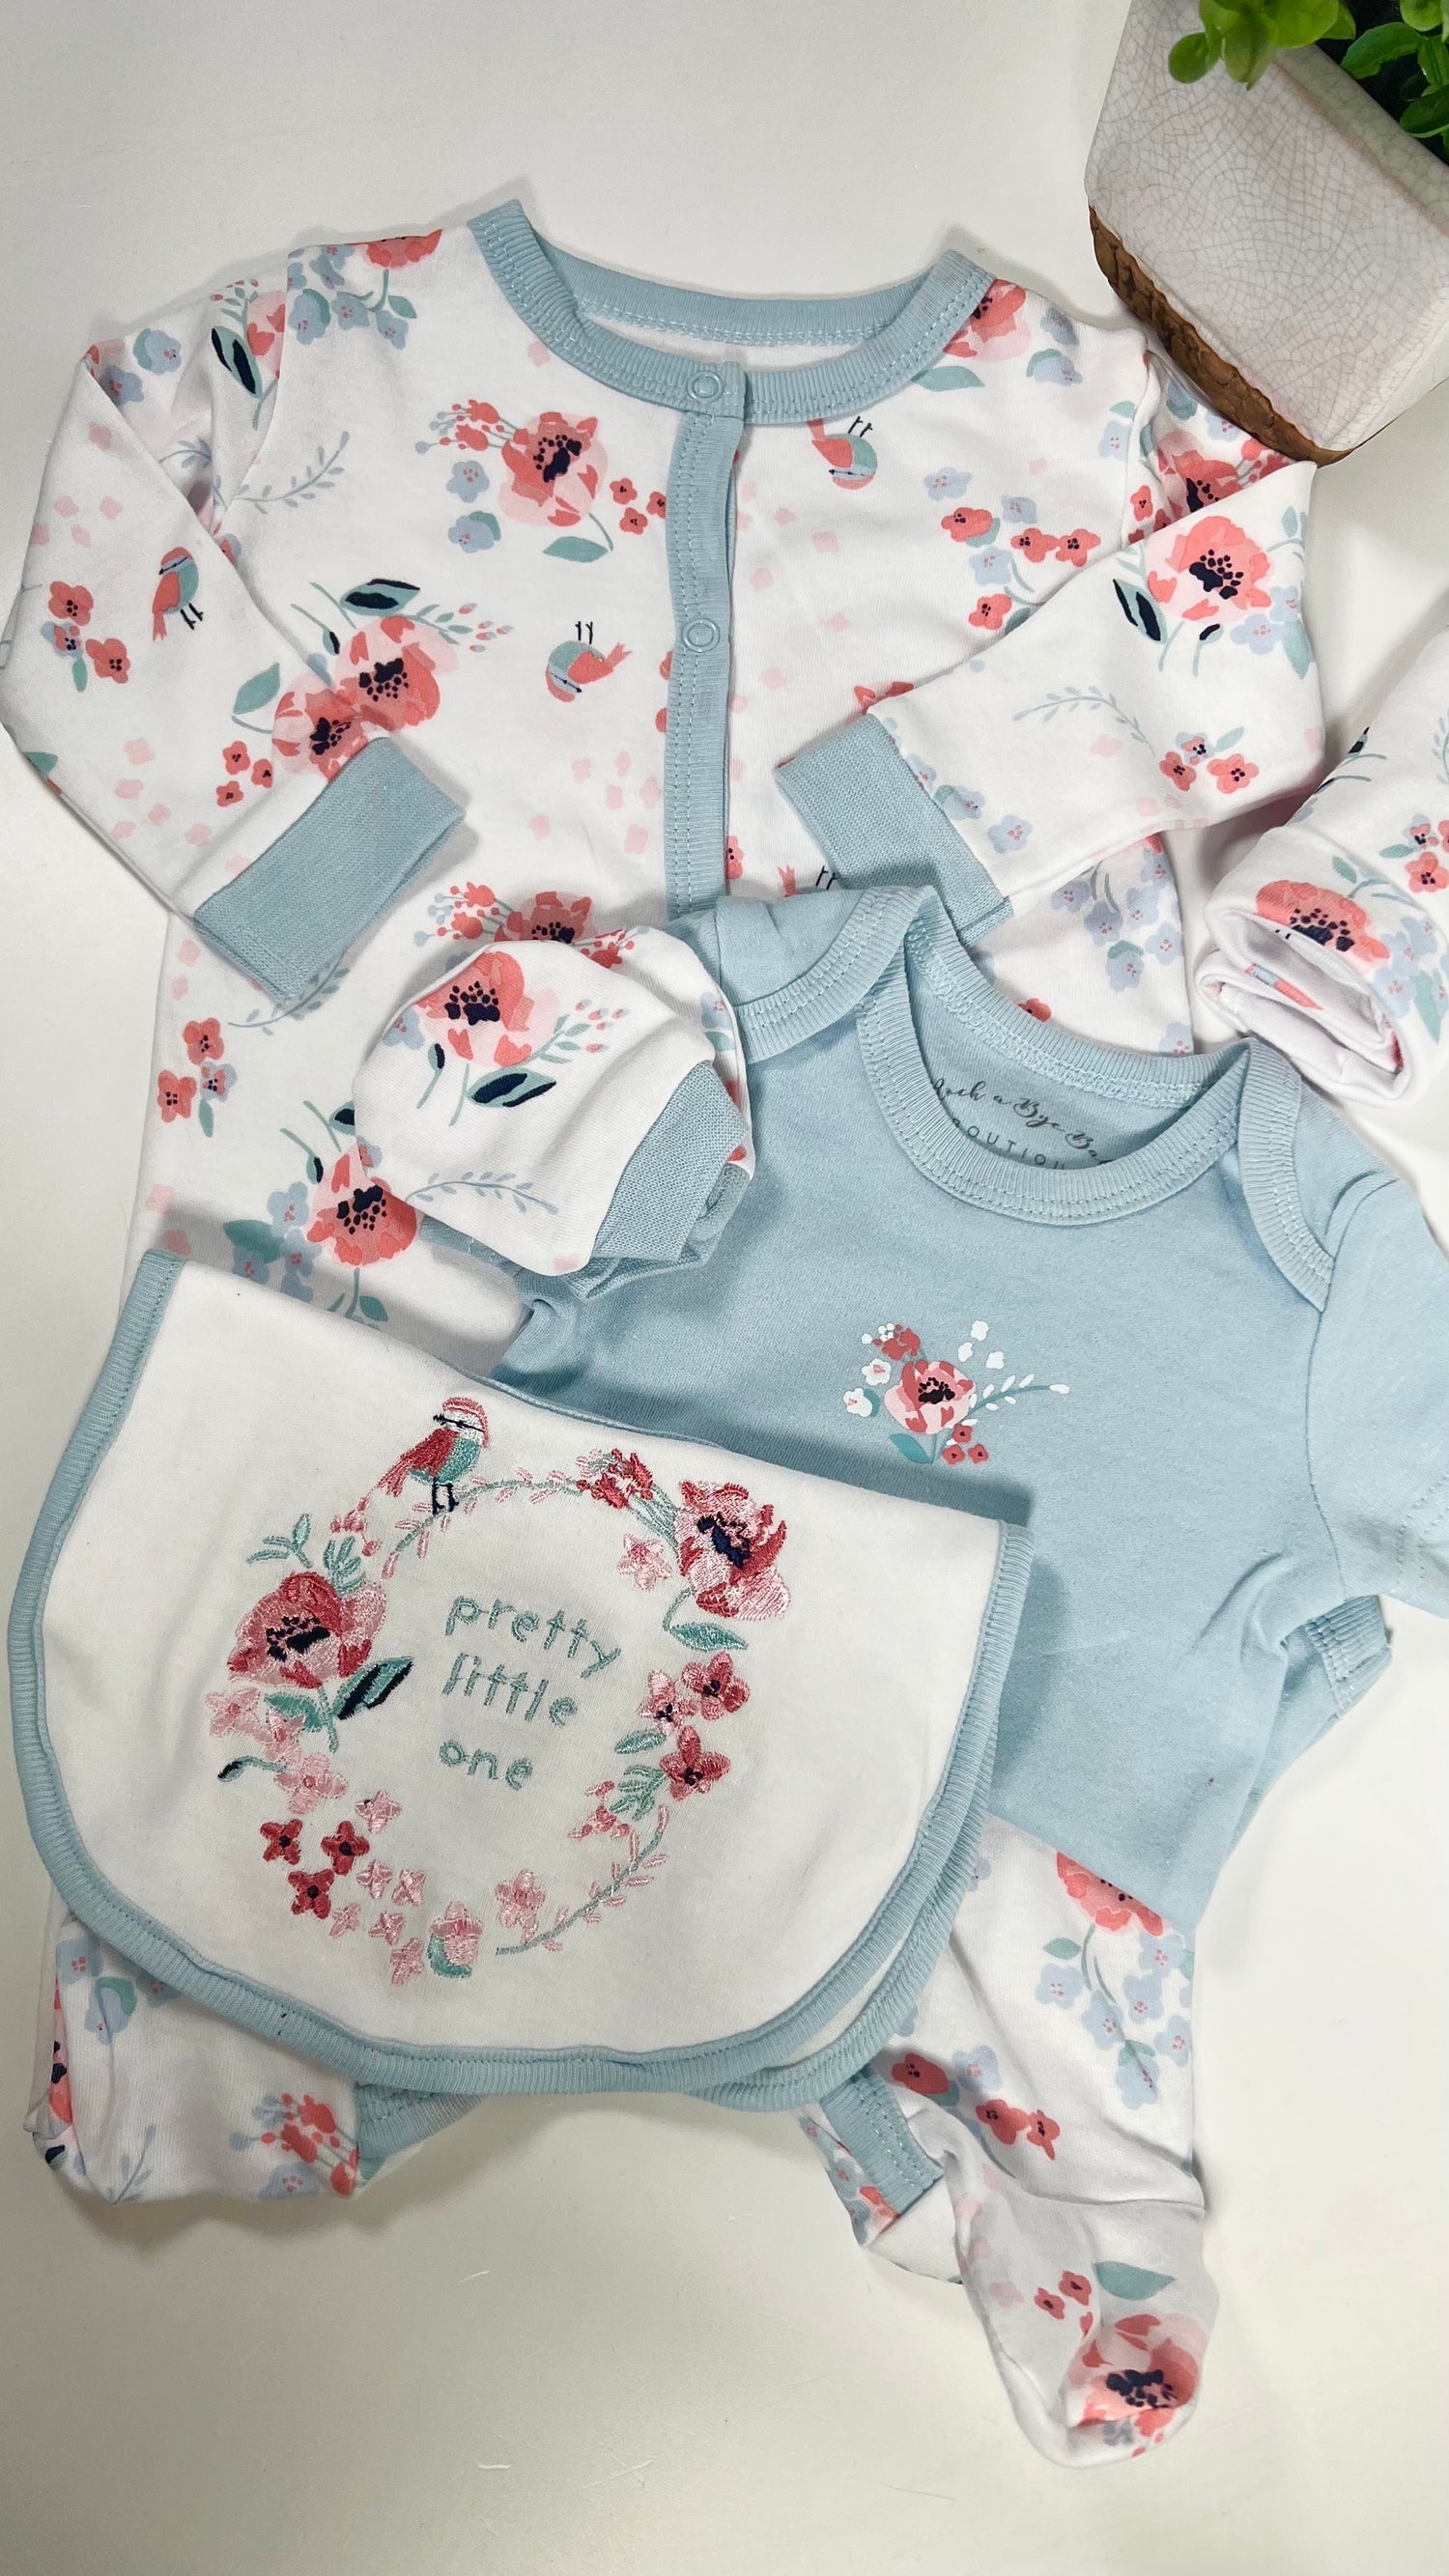 a 6 piece baby clothing set on white with a blue and pink floral pattern with birds and a blue trim. A matching baby bib, baby vest, hat and scratch mitts.